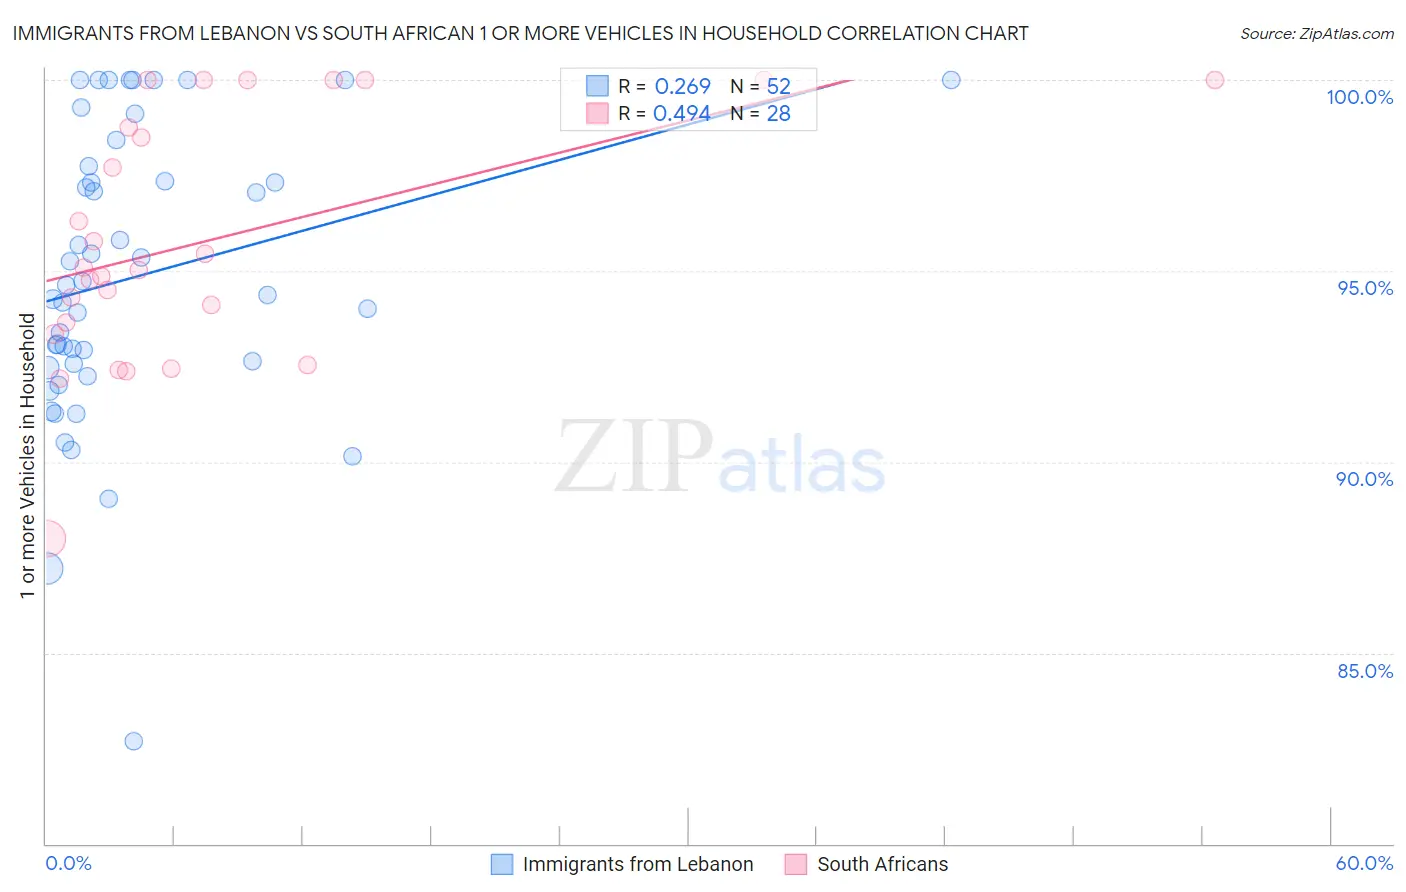 Immigrants from Lebanon vs South African 1 or more Vehicles in Household